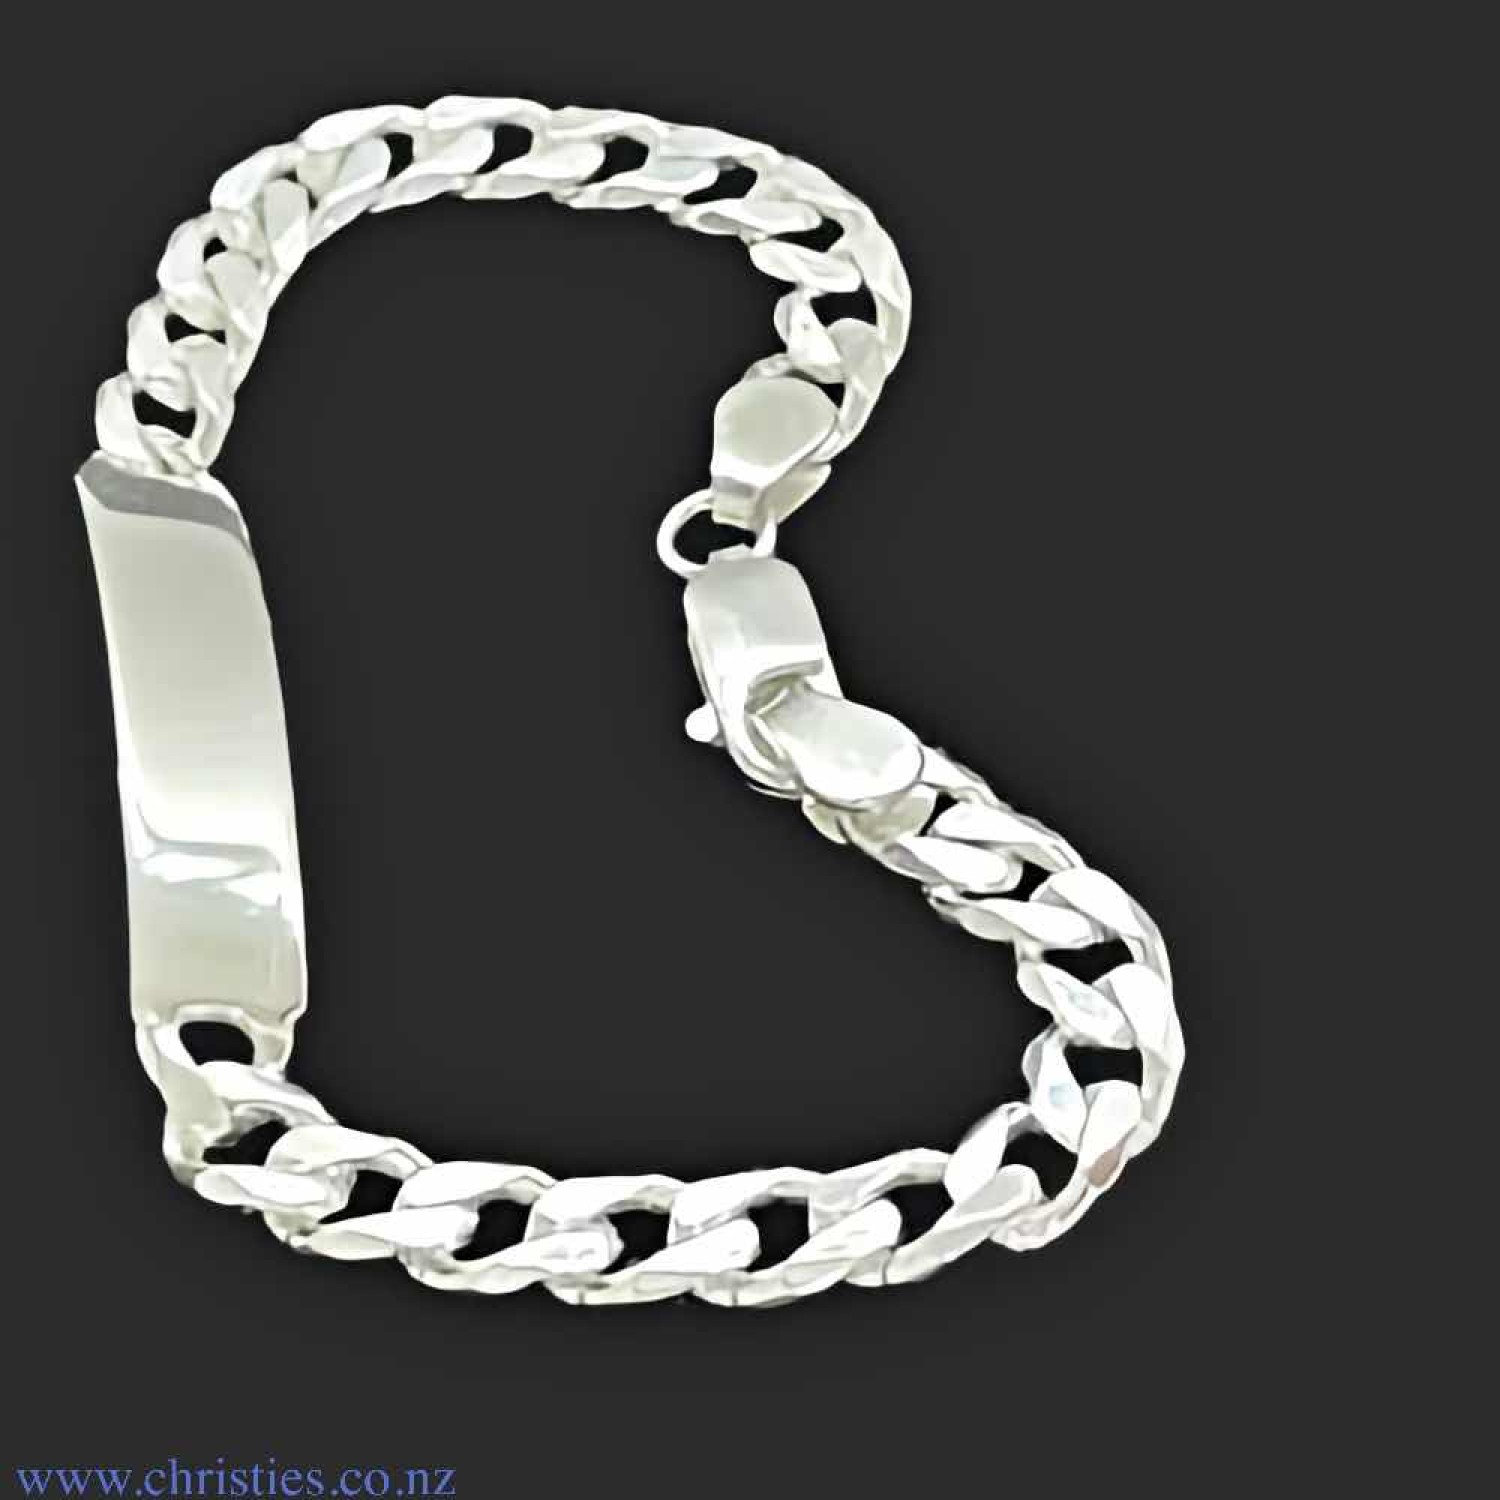 IDCD200H6C20 Sterling Silver ID Curb Link Bracelet. Medium weight  Identification bracelet crafted in 925 sterling silver  Afterpay - Split your purchase into 4 instalments - Pay for your purchase over 4 instalments, due every two weeks. You’ll pay @chris